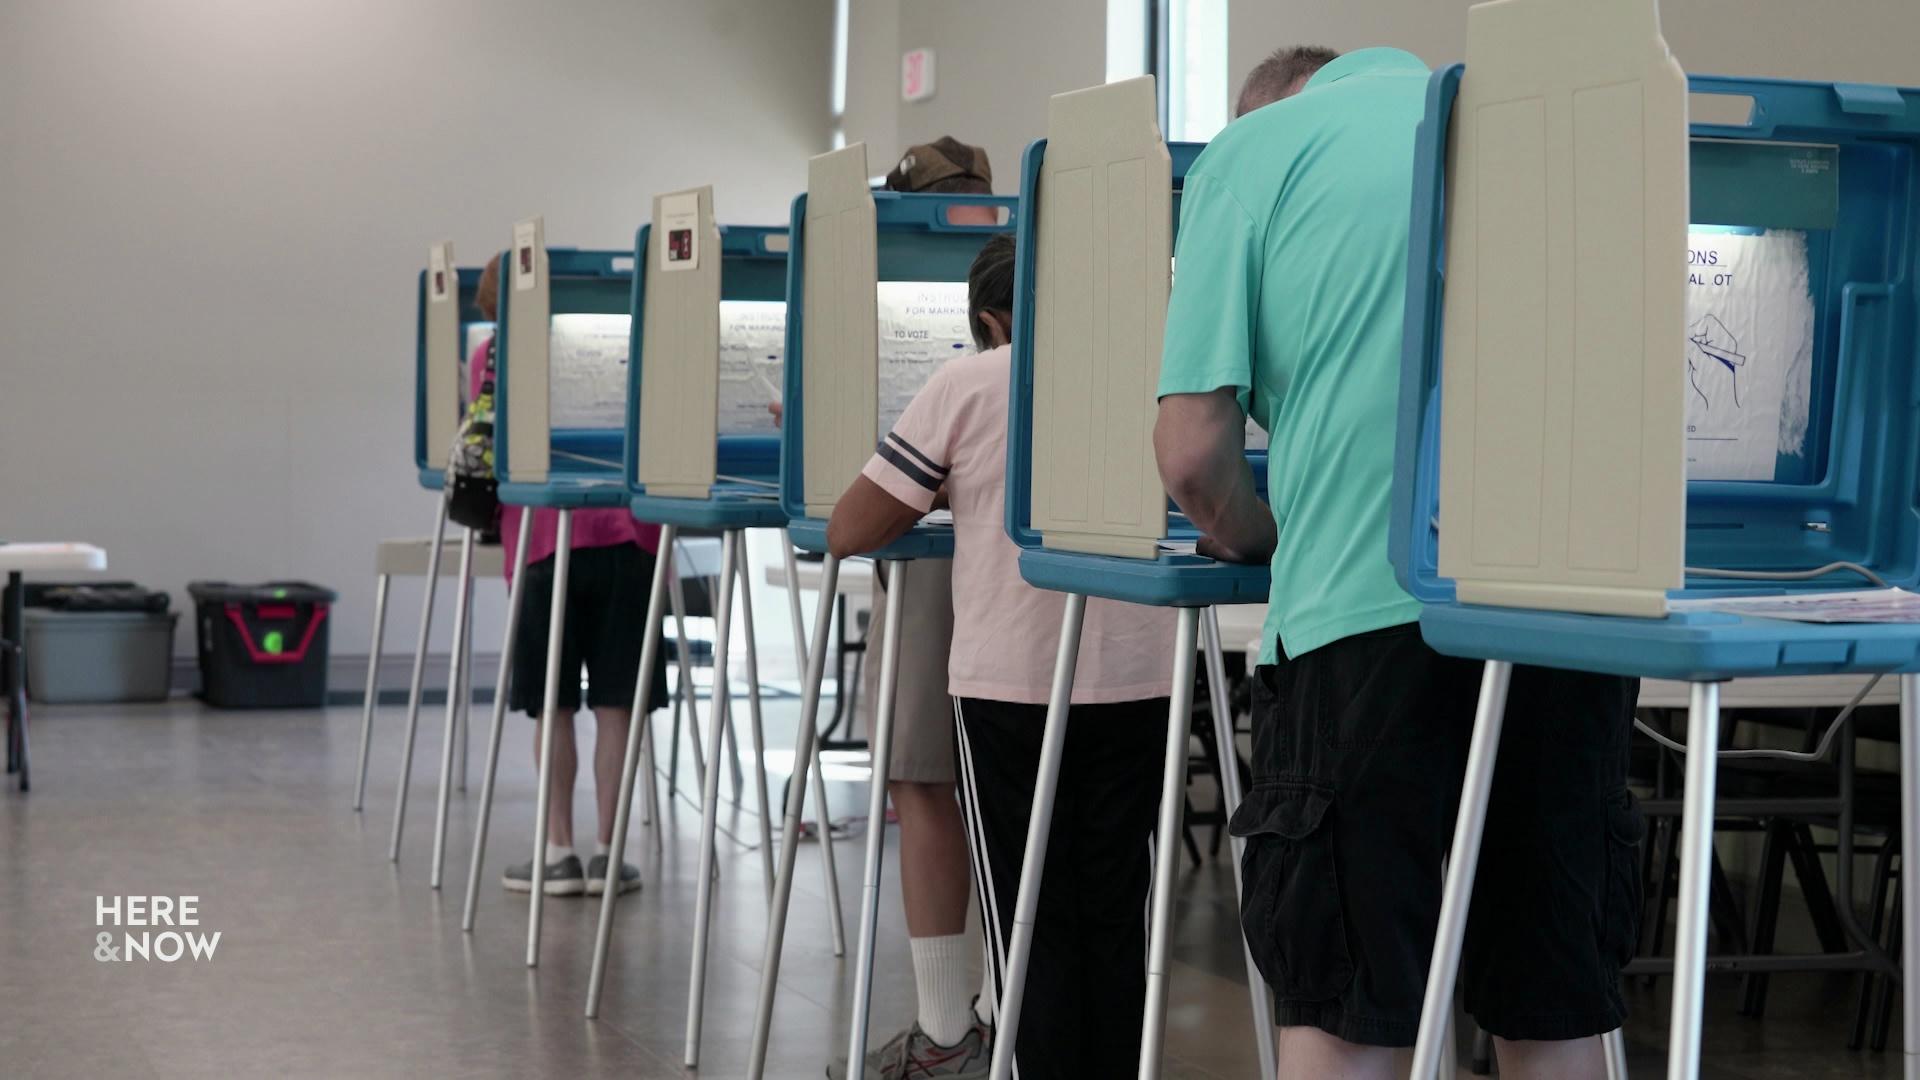 A still image shows a row of voting polls with people standing and writing at different booths.